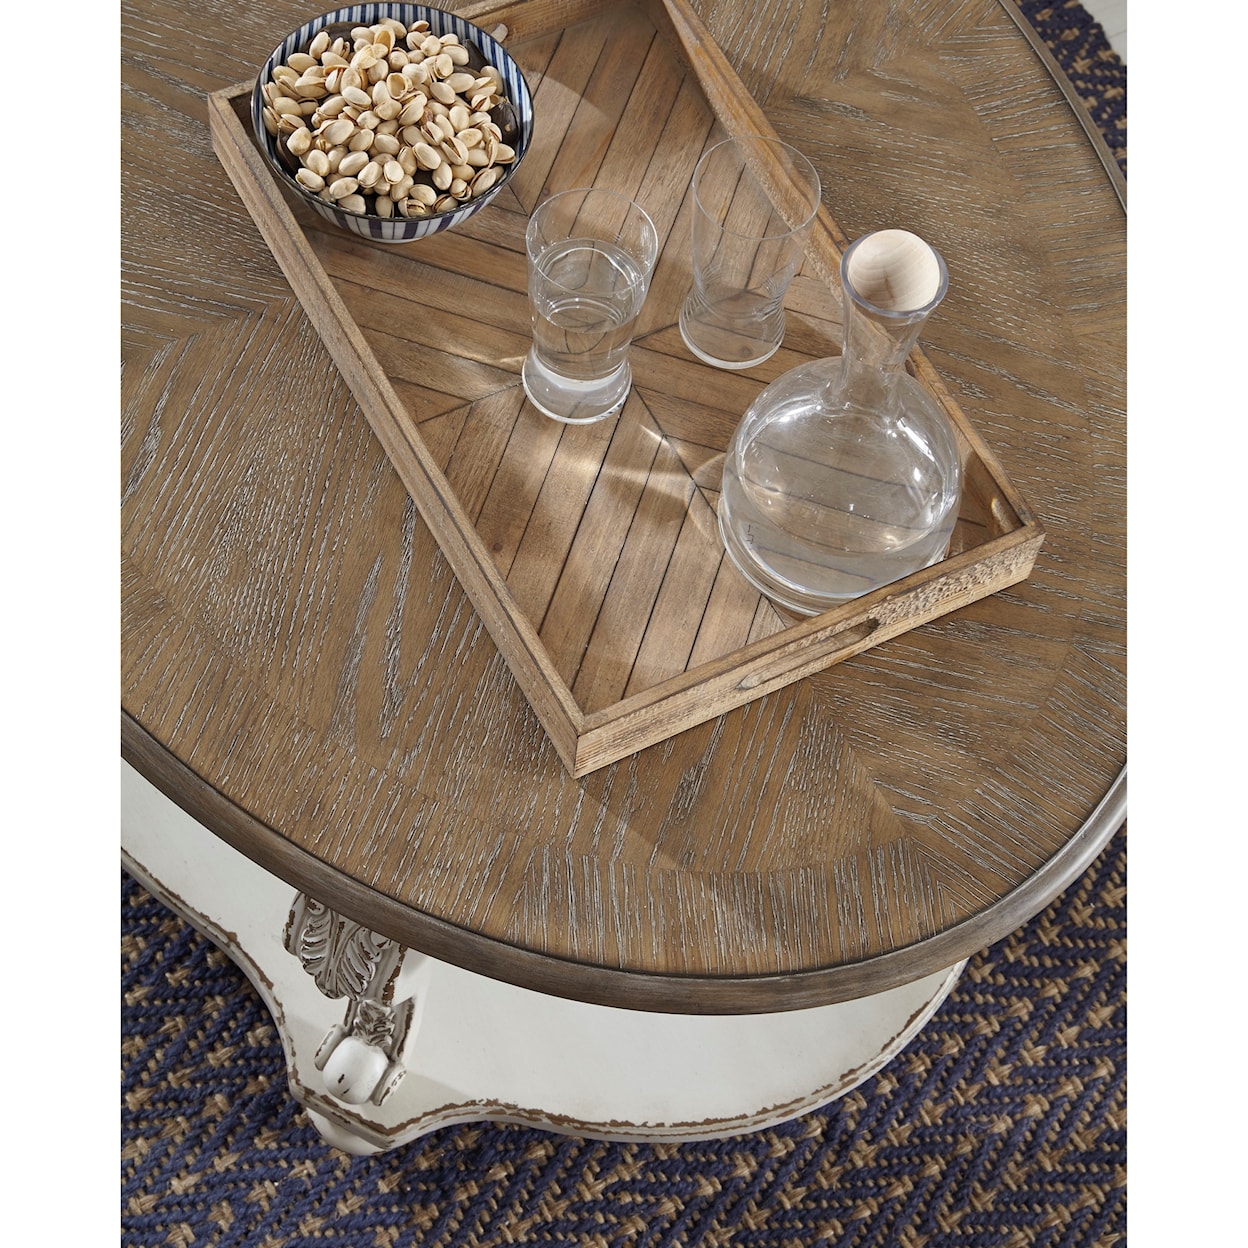 Signature Design by Ashley Furniture Realyn Oval Cocktail Table